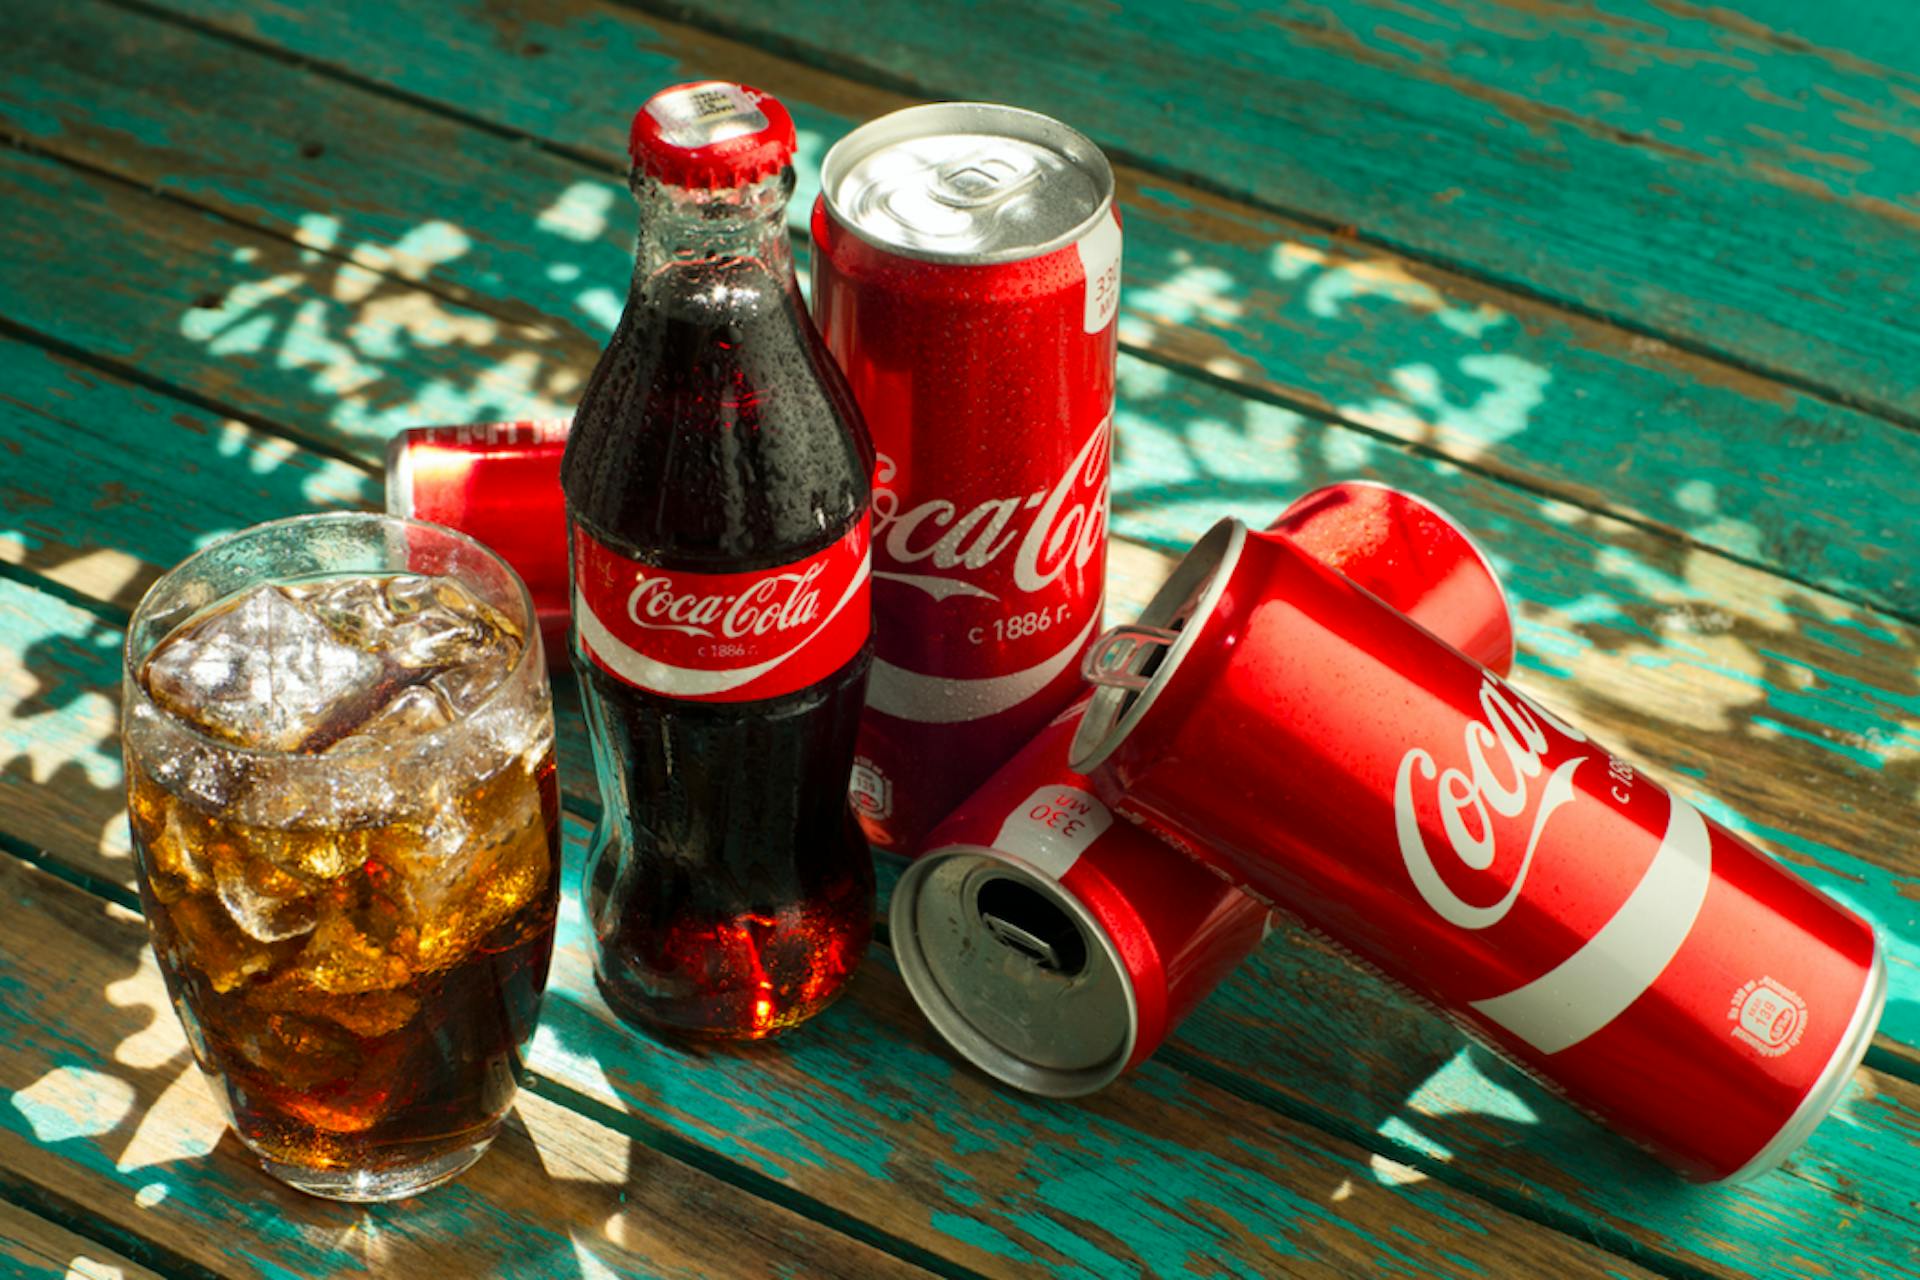 coca-cola can and glass bottle on a wooden table and glass with ice